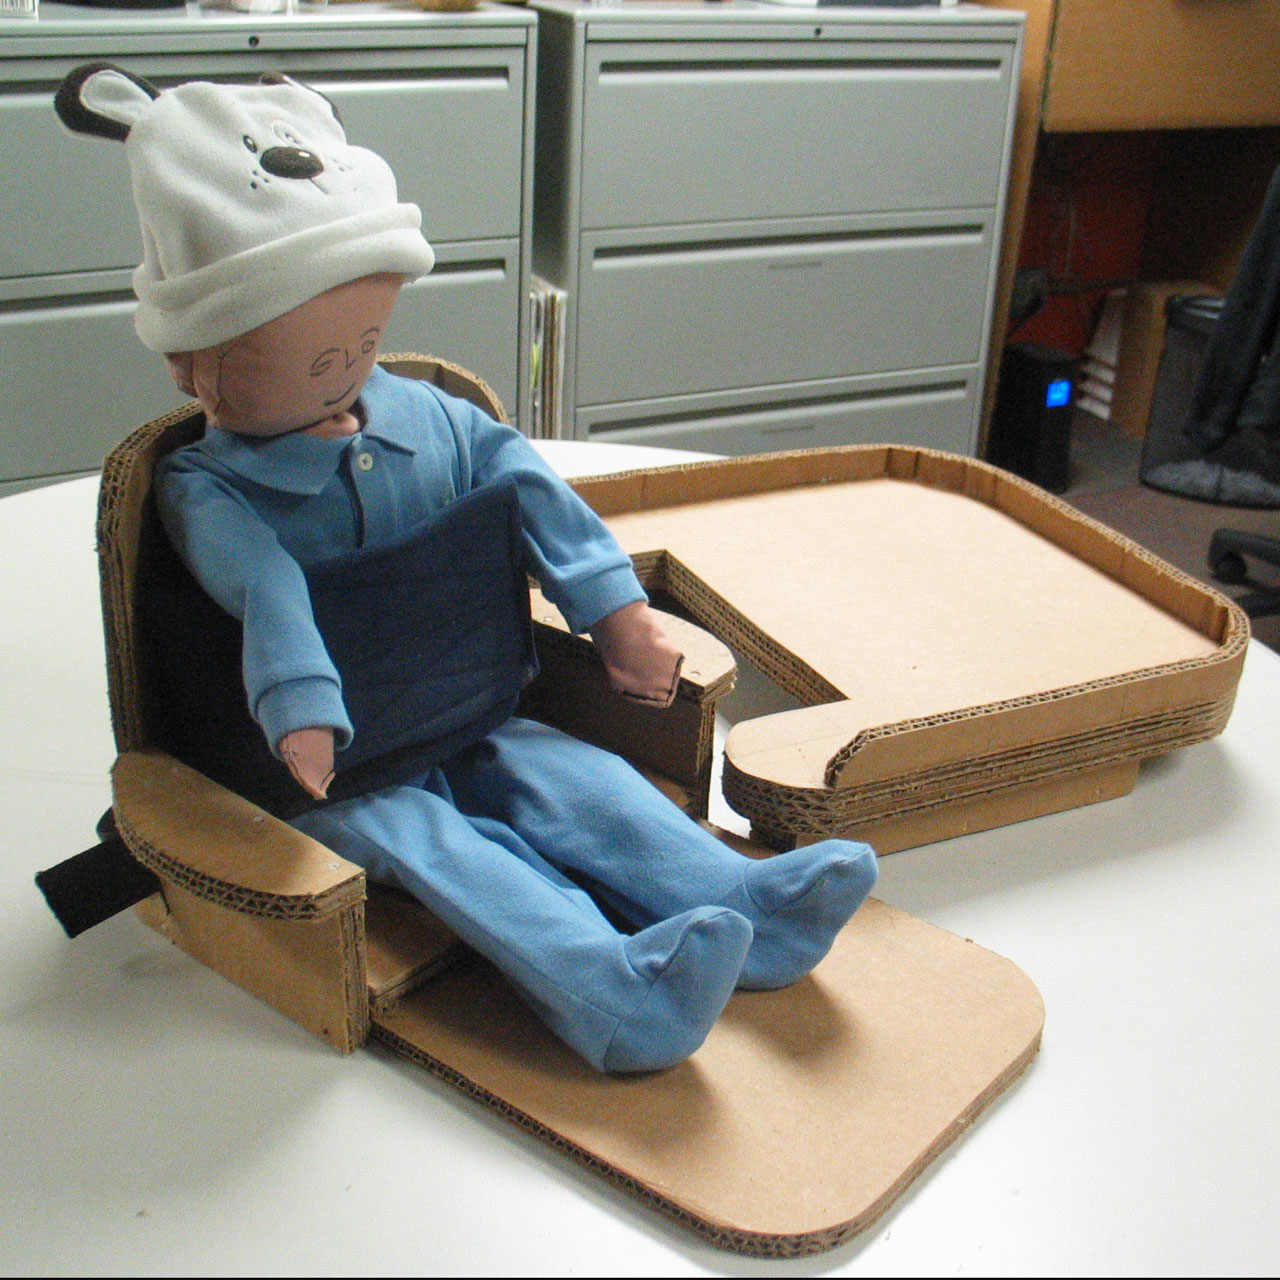 Toddler-sized doll in a cardboard seat